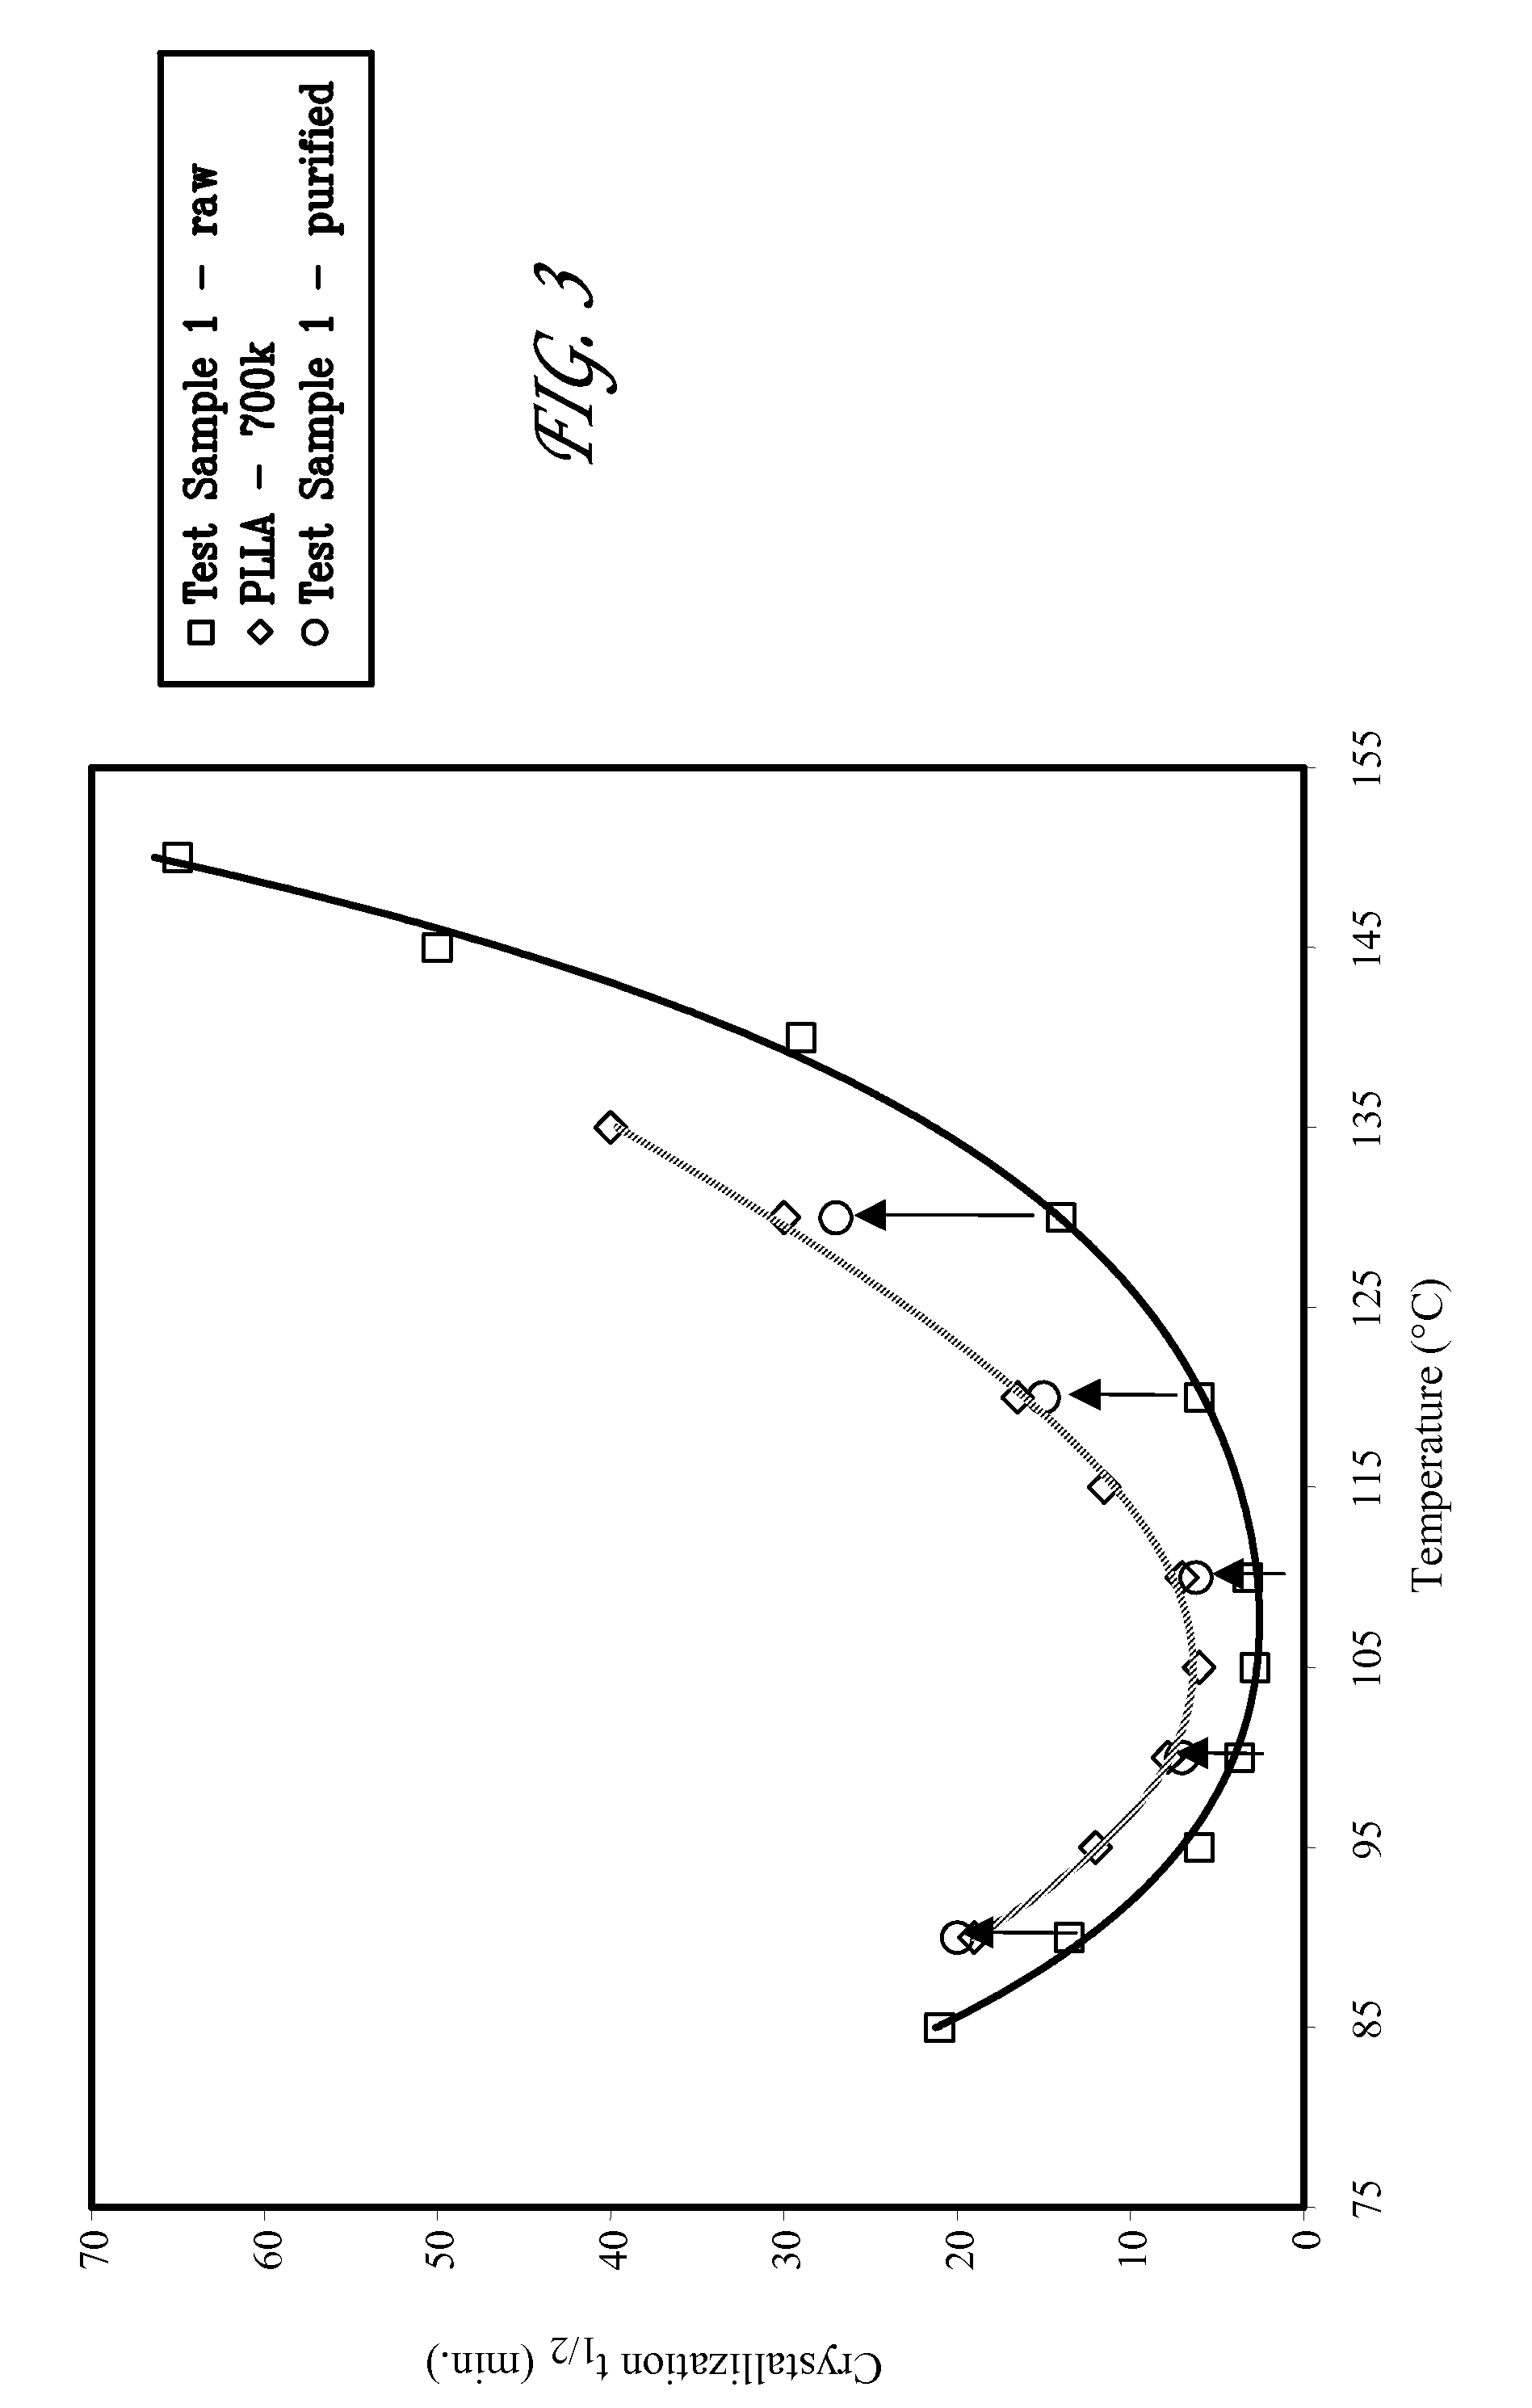 Bioabsorbable polymer compositions exhibiting enhanced crystallization and hydrolysis rates